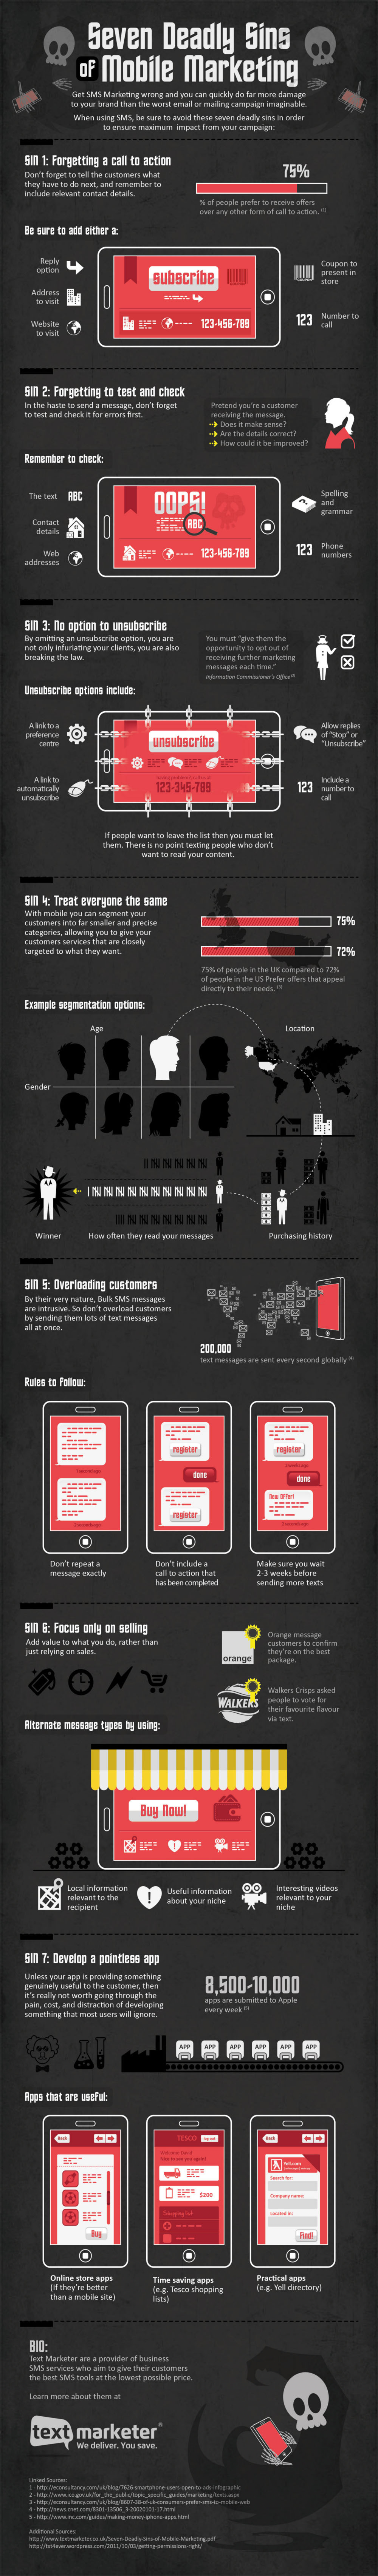 7 Deadly Sins of Mobile Marketing